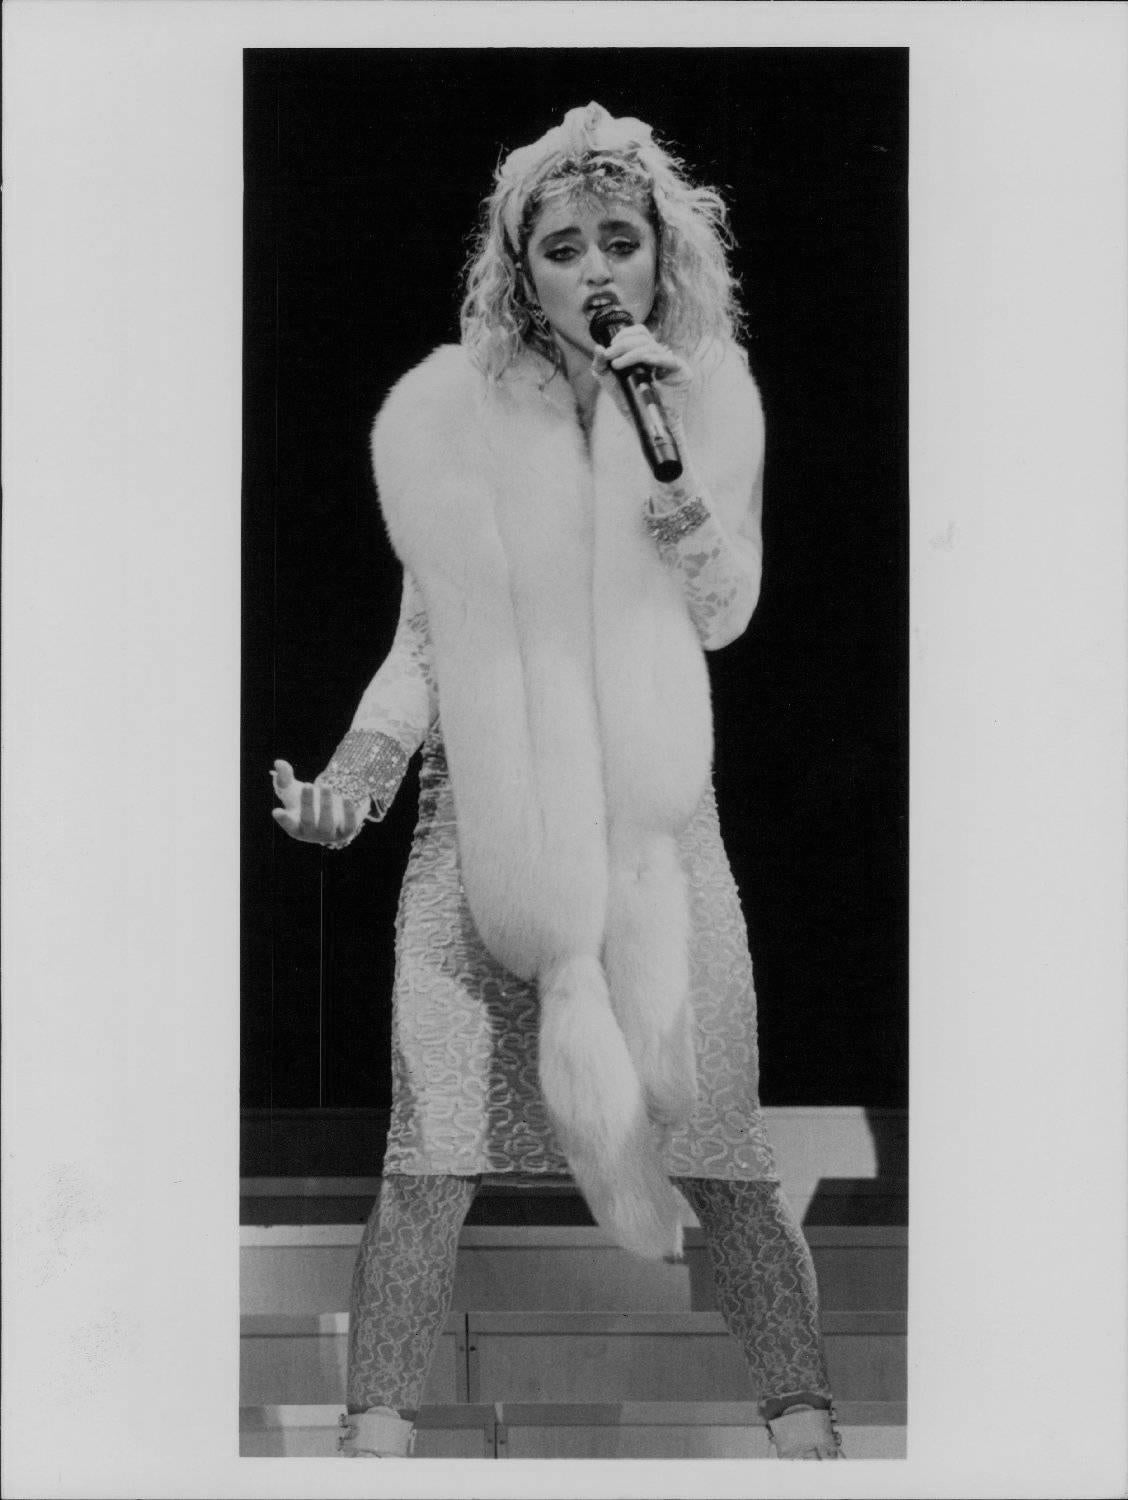 Ebet Roberts Portrait Photograph - Madonna Performing on Stage in White Vintage Original Photograph